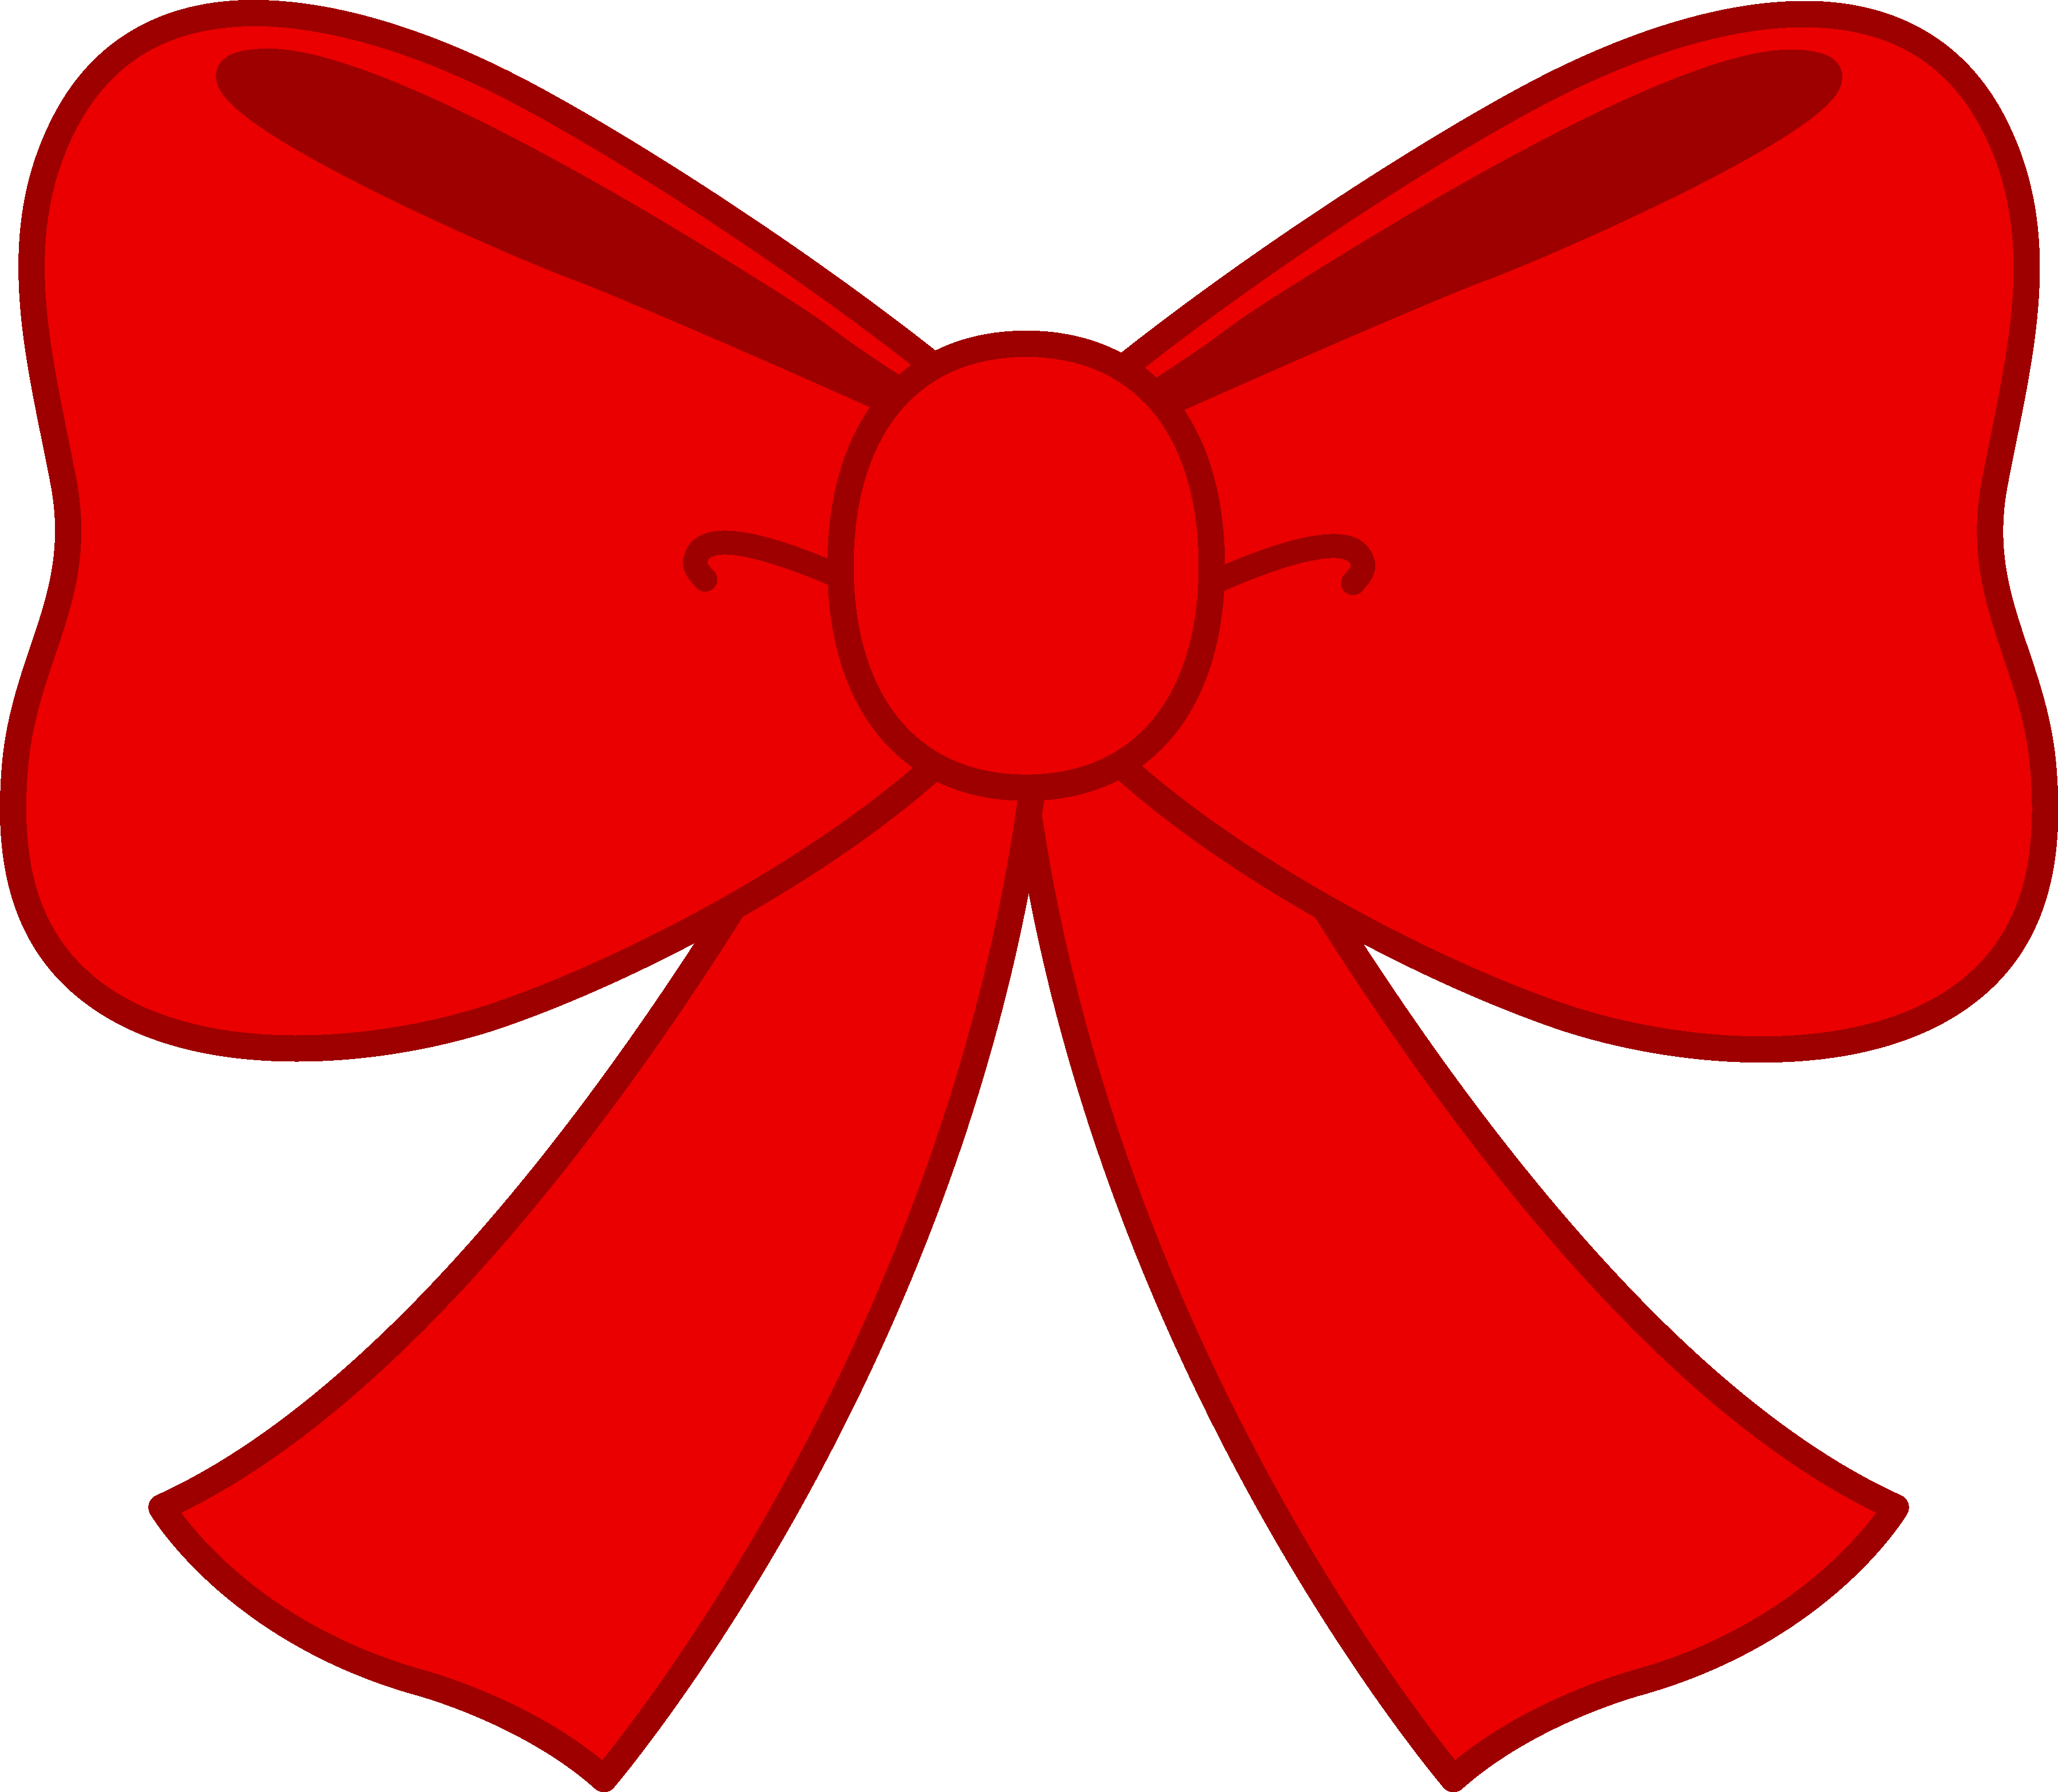 Bow clipart free download